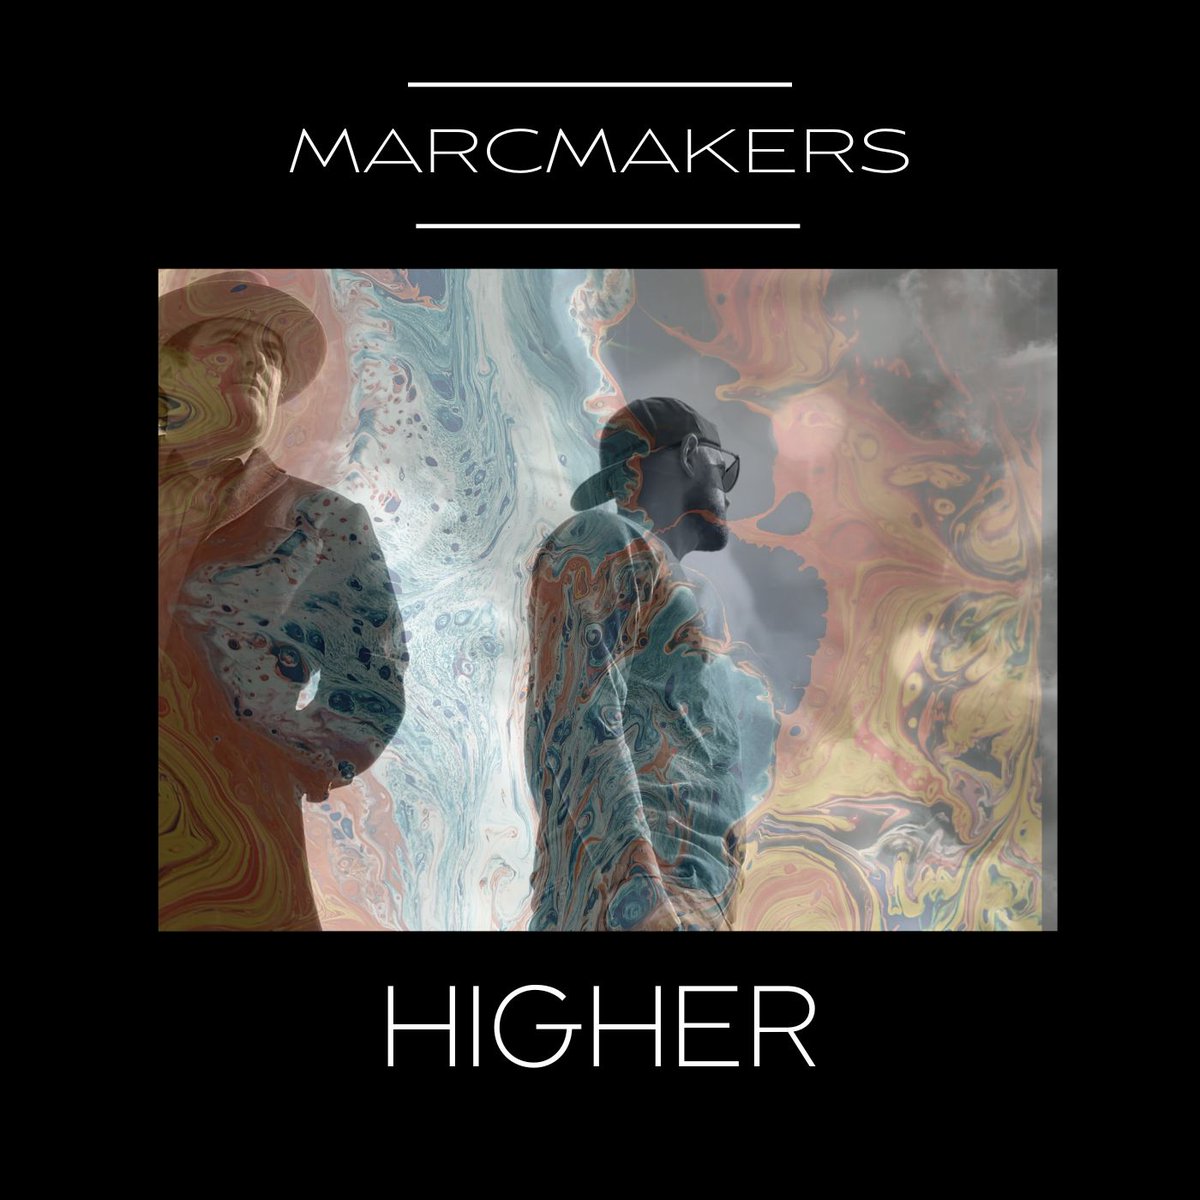 Celebrating this song coming out 3 weeks ago and receiving such positive feedback! Enjoy your Halloween weekend🎃 #MarcMakers #Higher #Pop